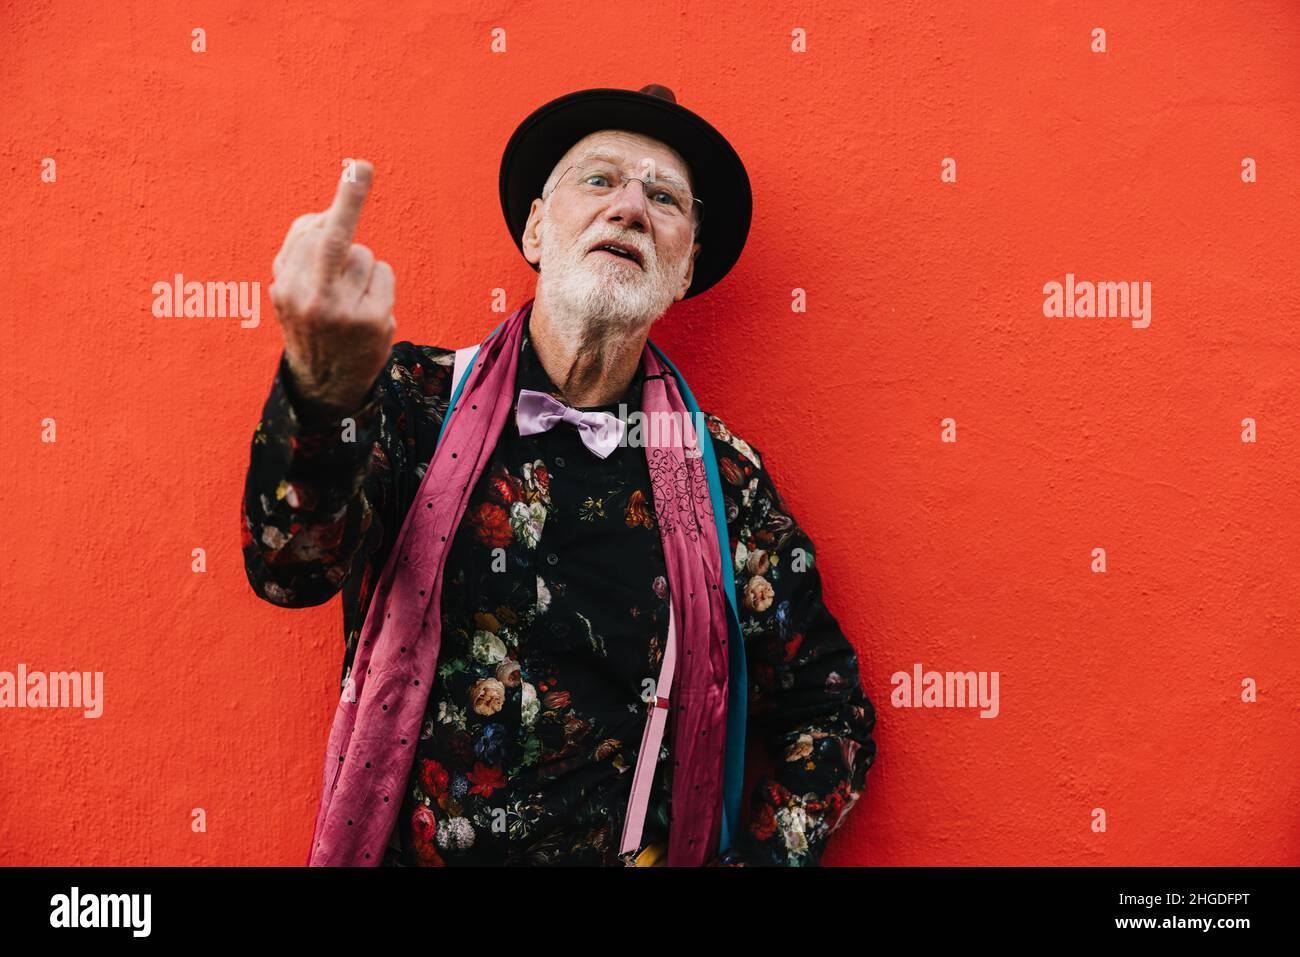 Mature man showing his middle finger against a red background. Senior man looking at the camera while making a swear gesture. Retired elderly man wear Stock Photo